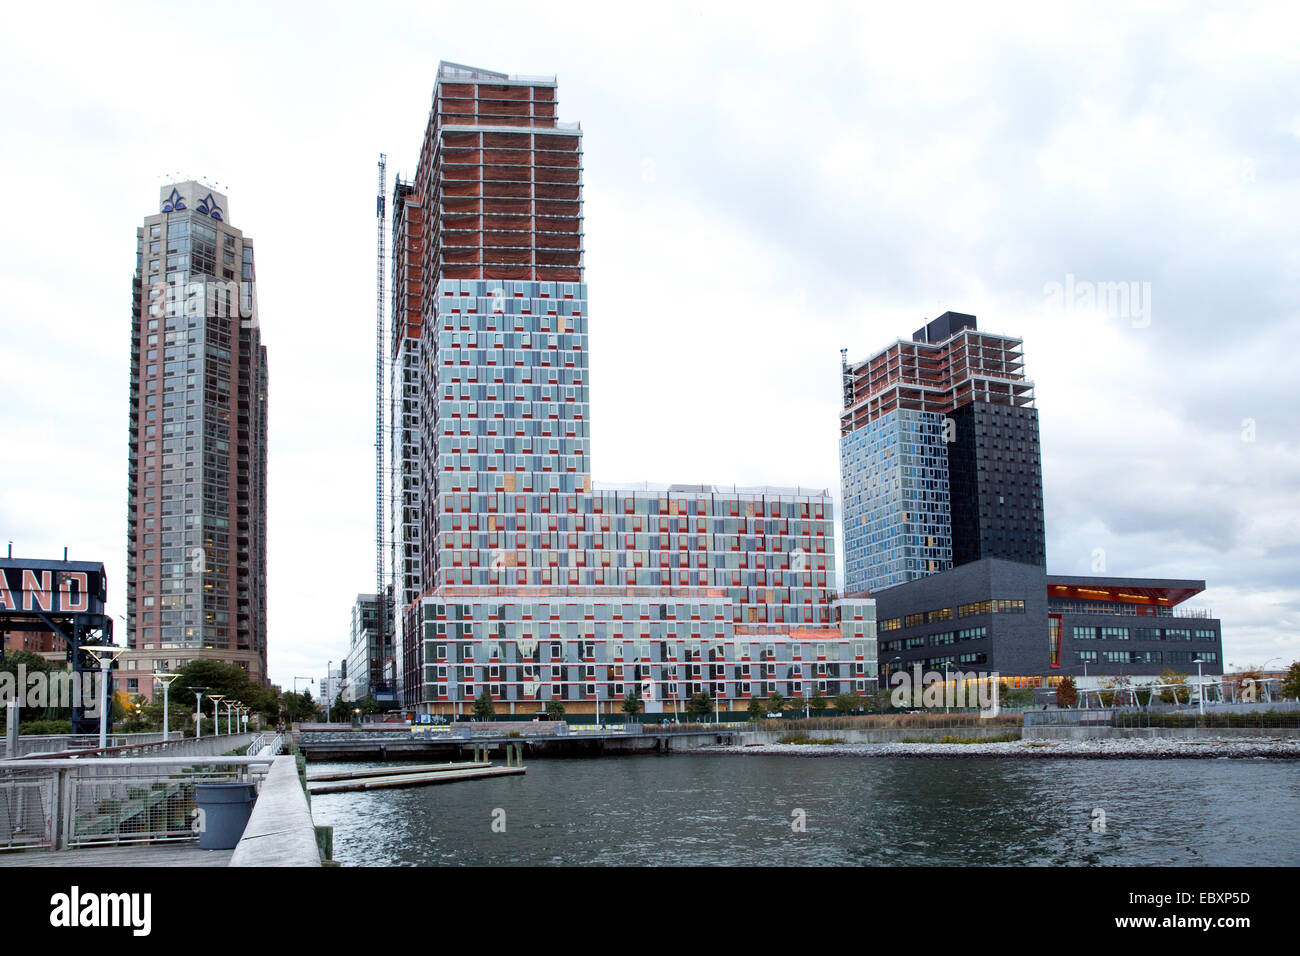 Hunters Point South Entwicklung, Long Island City, Queens, NY, USA, New York City, 18. Oktober 2014. Stockfoto